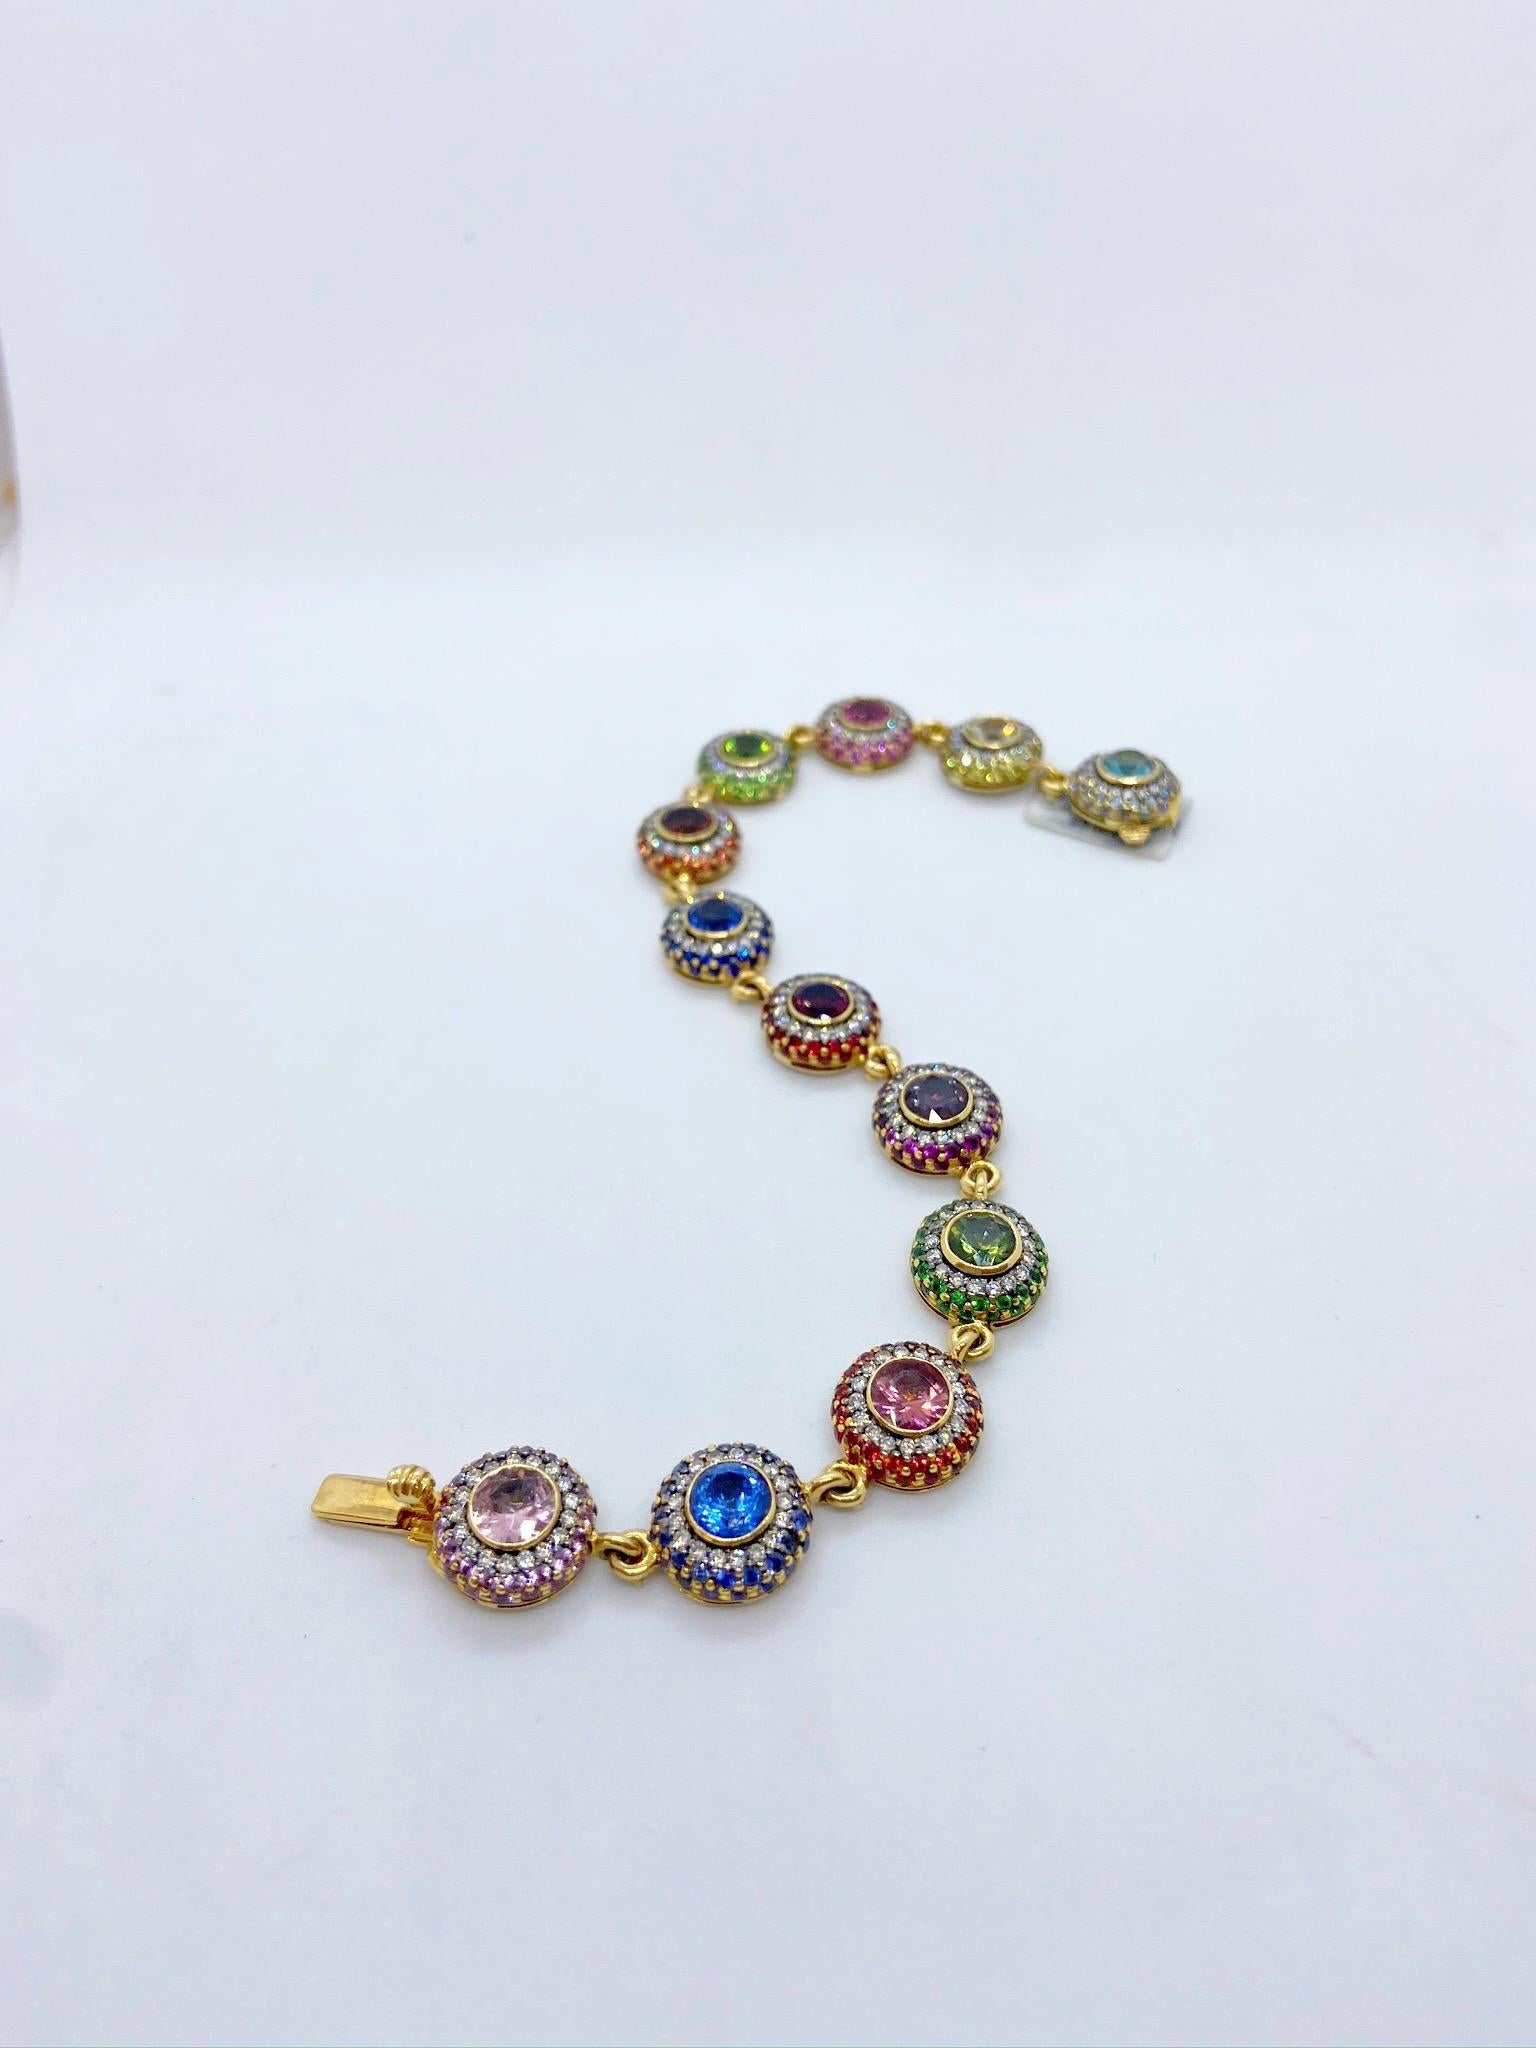 Modern Zorab 18Kt YG Bracelet with Diamonds, Multicolored Sapphires and Semi Precious For Sale